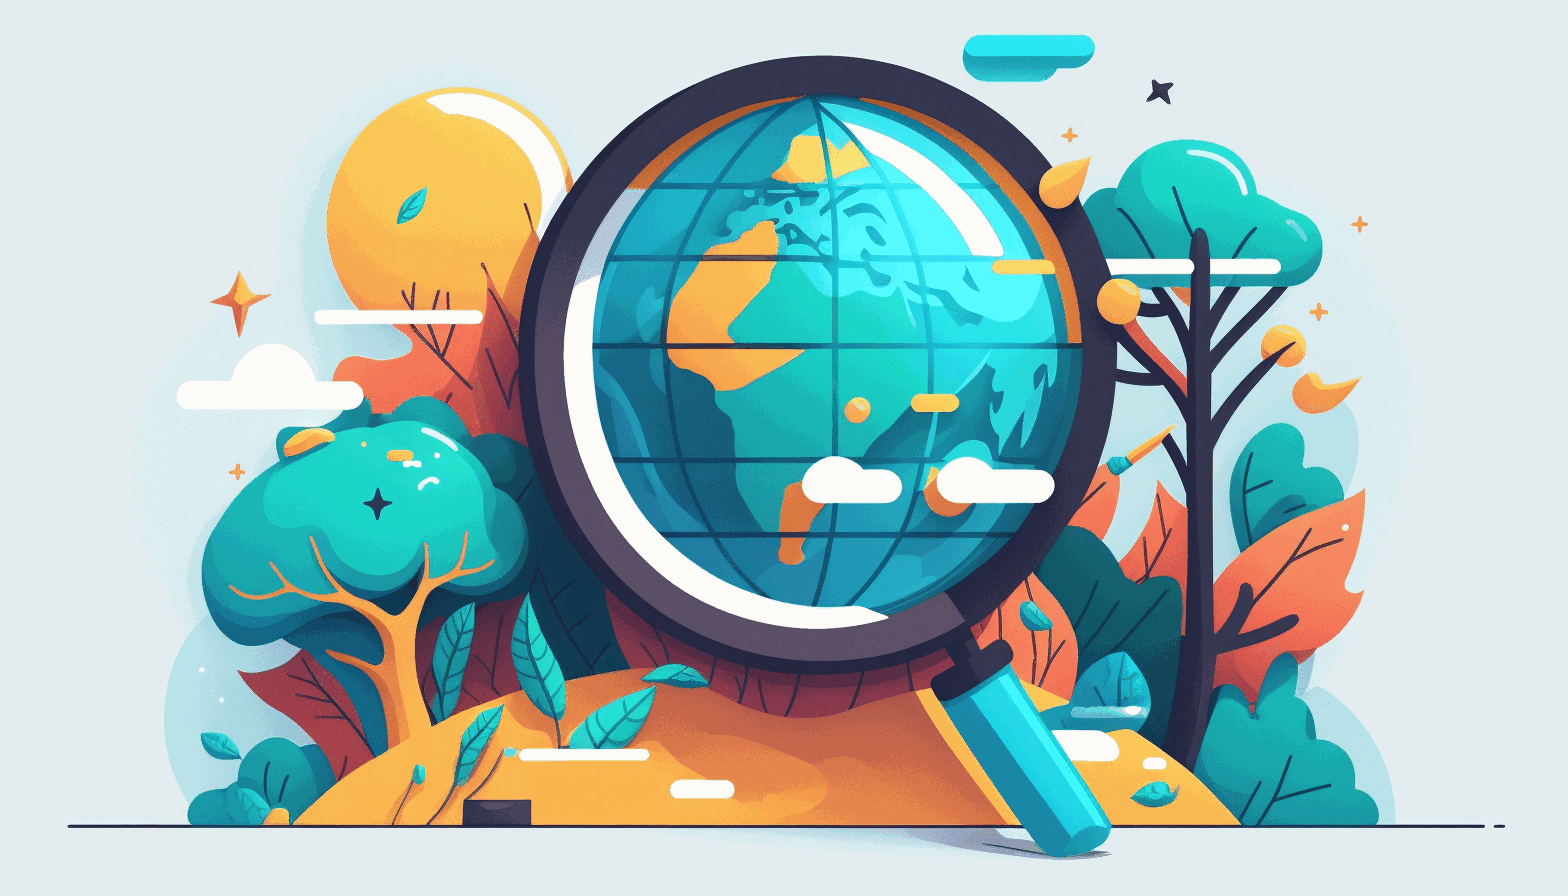 A cartoonish world globe with a magnifying glass hovering over it symbolizing the Presearch platform as a community-driven and decentralized search engine